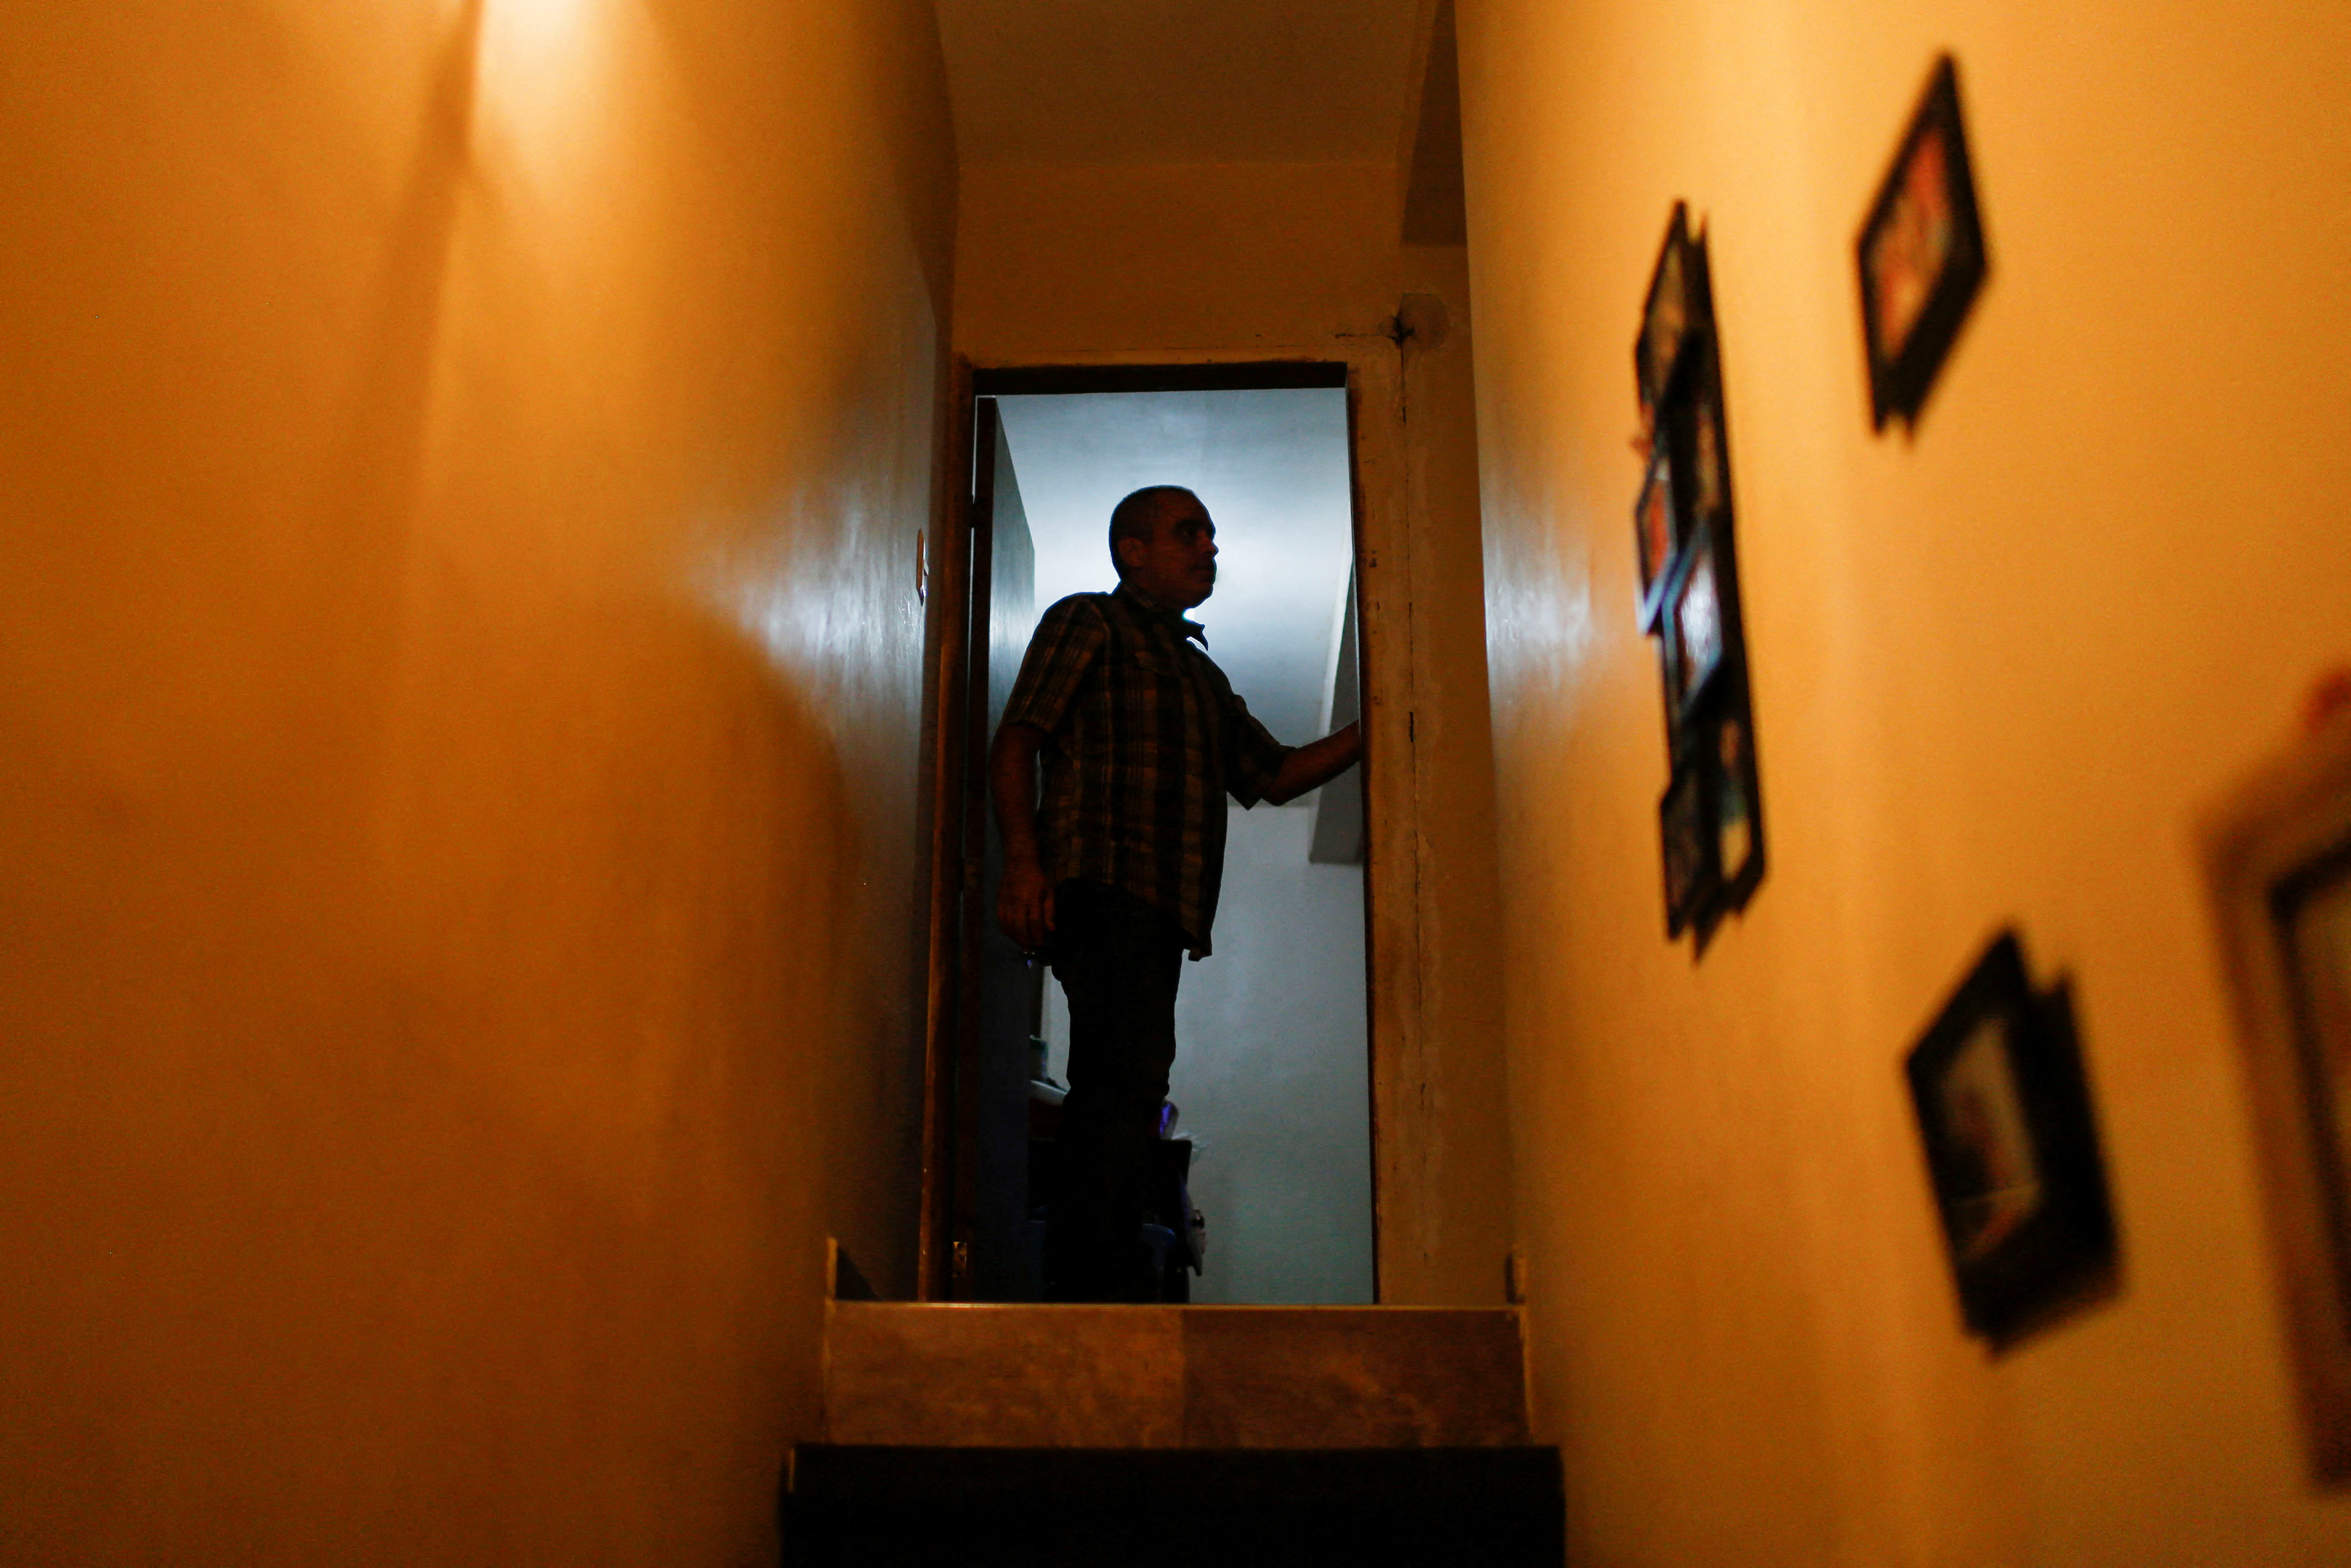 Anibal Pirela prepares in his home days before immigrating with his four-year-old son to join his wife and daughter in the United States, in Maracaibo, Venezuela November 30, 2021. REUTERS/Leonardo Fernandez Viloria